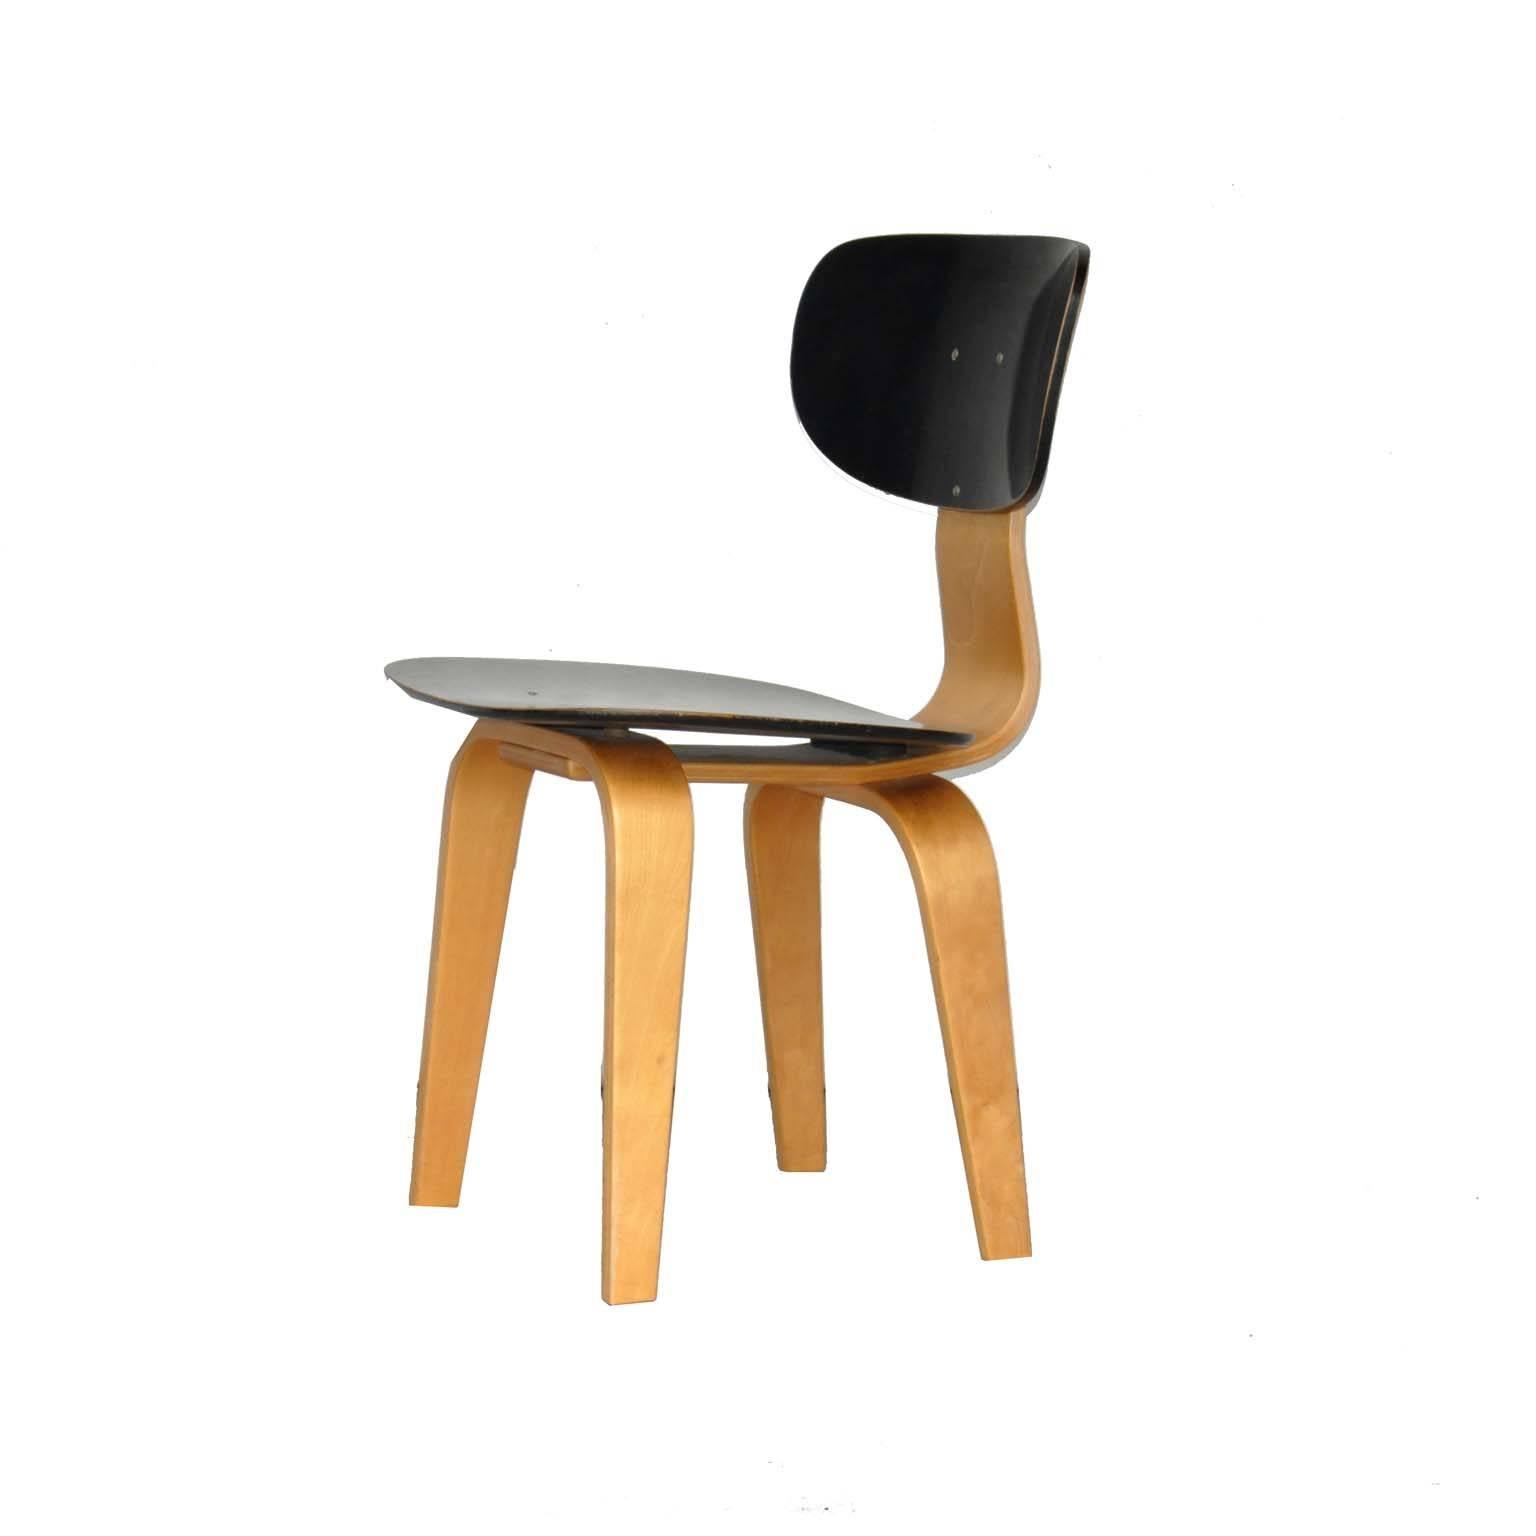 Dutch SB02 Dining Chair by Cees Braakman for Pastoe in Birchwood